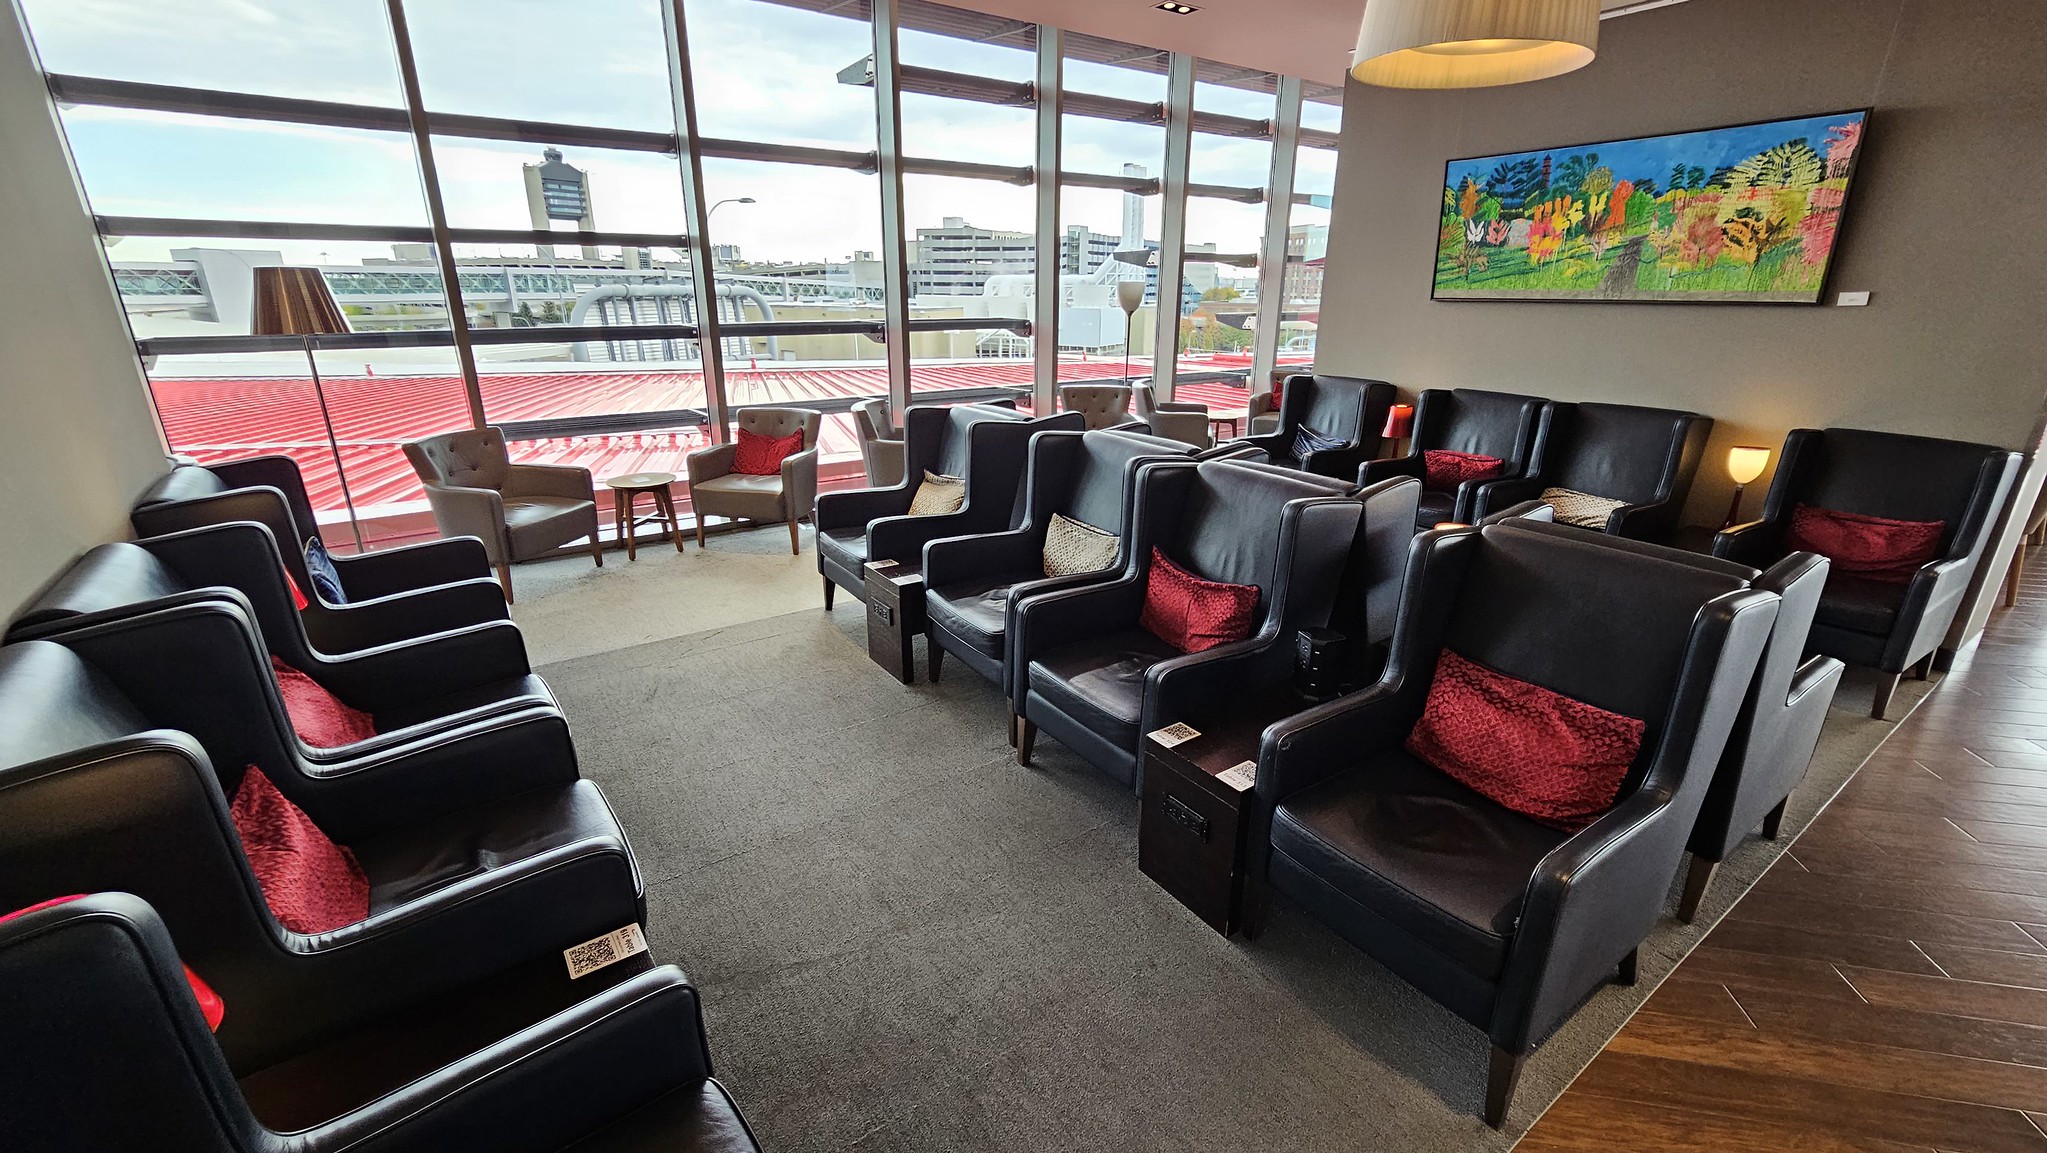 There is a good selection of seating in the lounge